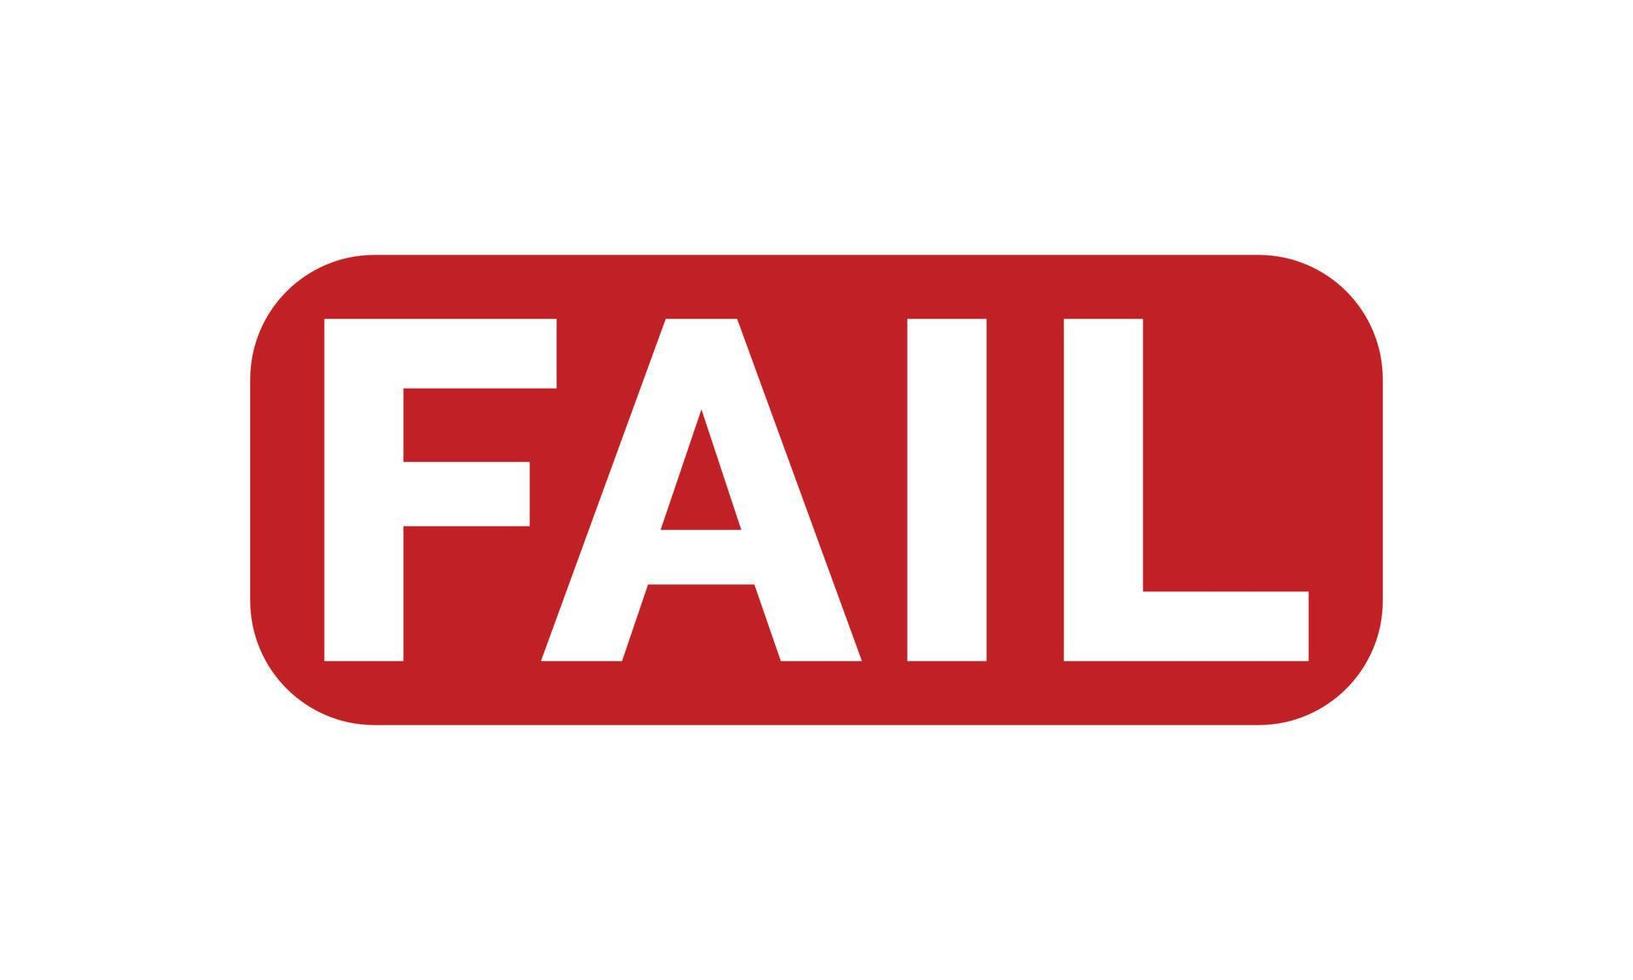 Fail Rubber Stamp. Red Fail Rubber Grunge Stamp Seal Vector Illustration - Vector